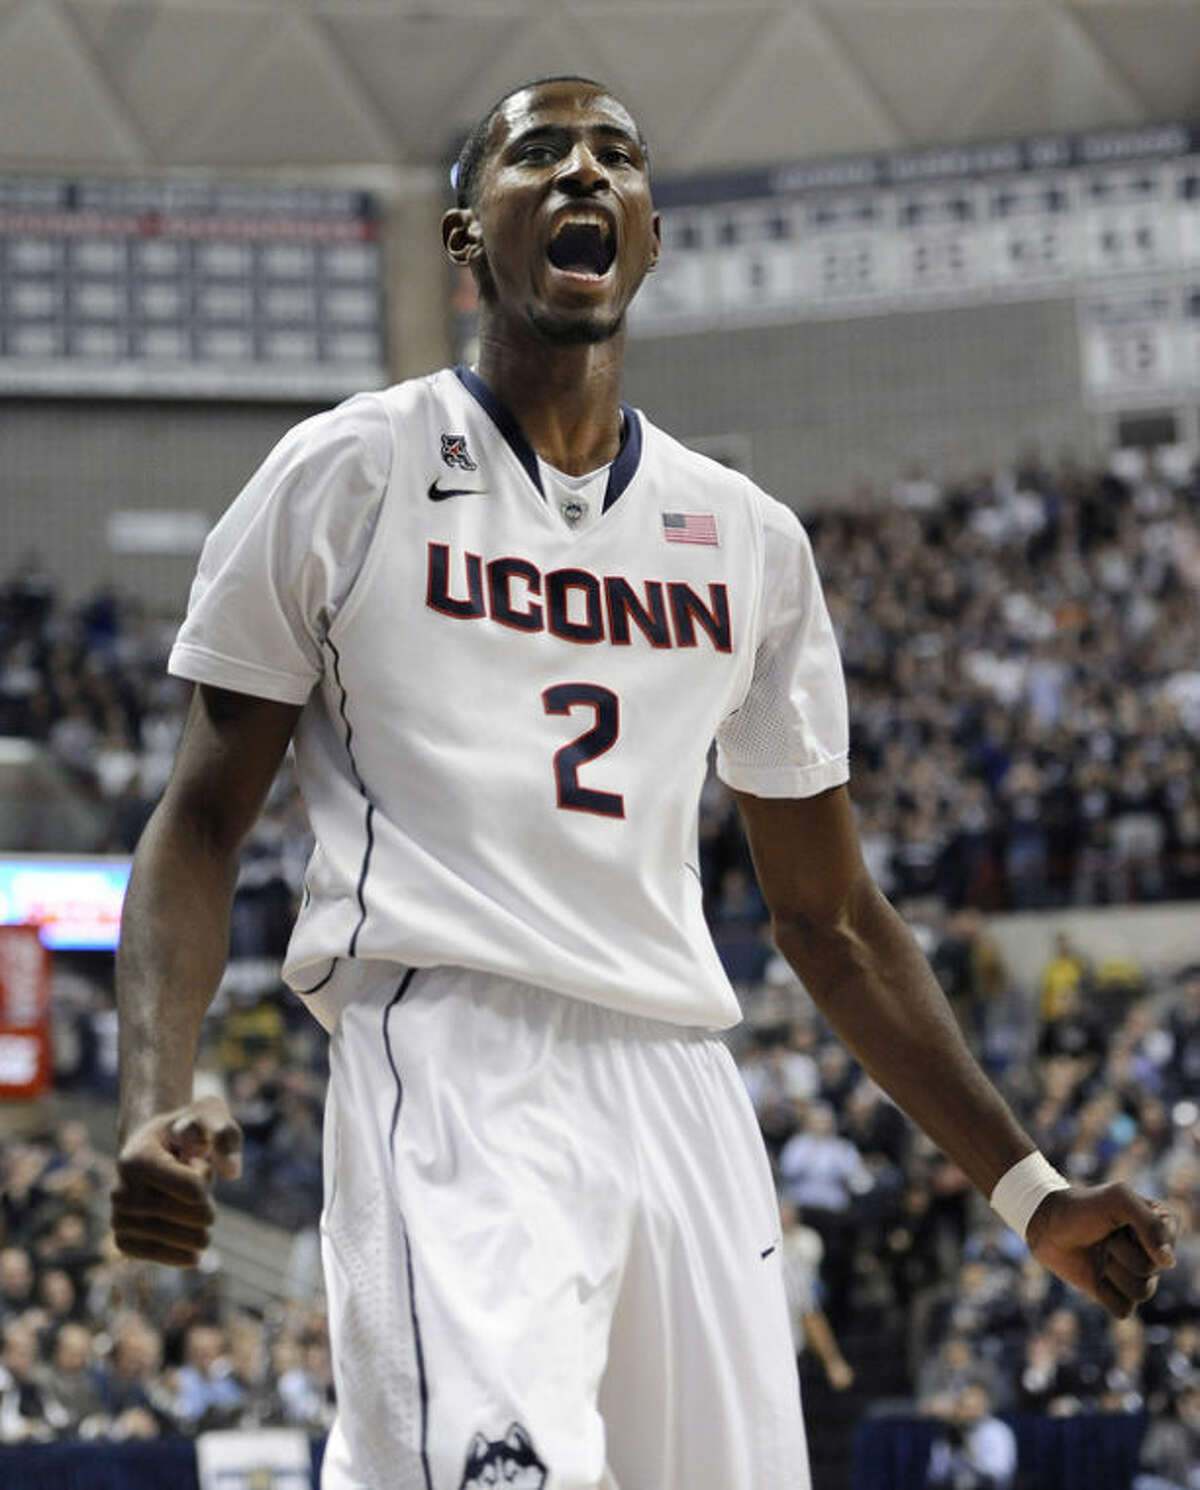 Connecticut's DeAndre Daniels reacts during the first half of an NCAA college basketball game against Florida, Monday, Dec. 2, 2013, in Storrs, Conn. (AP Photo/Jessica Hill)